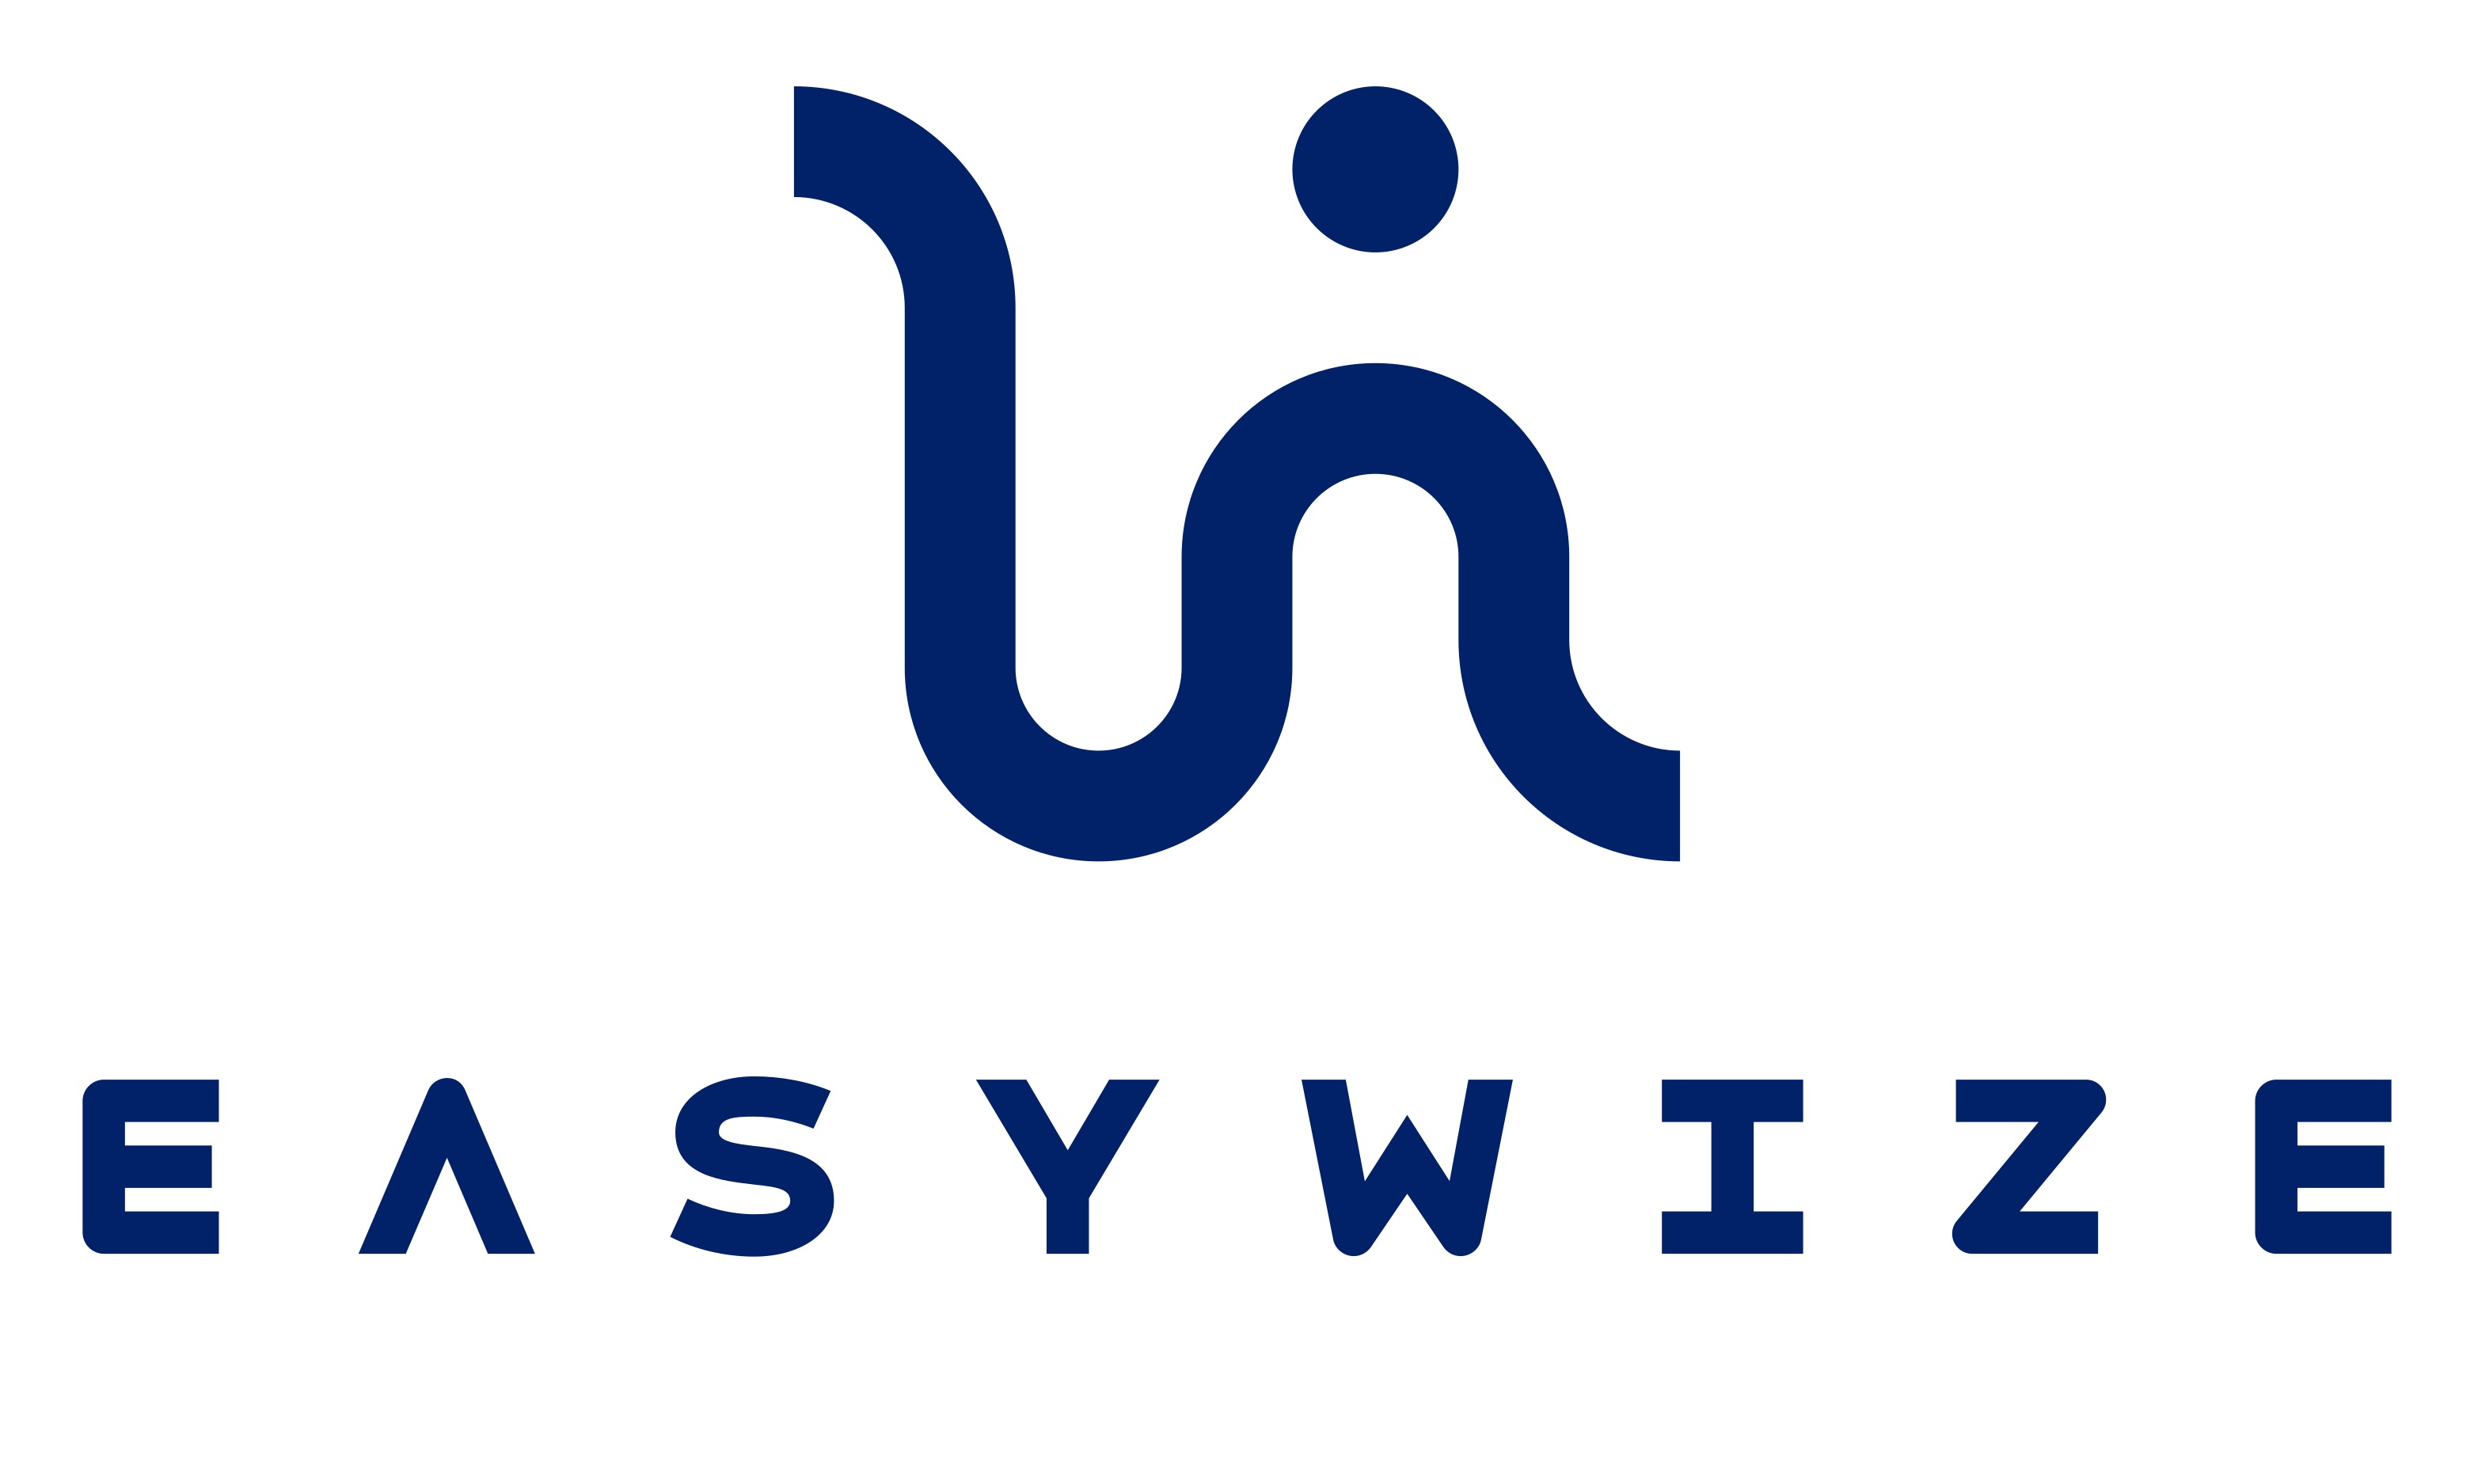 EASYWIZE